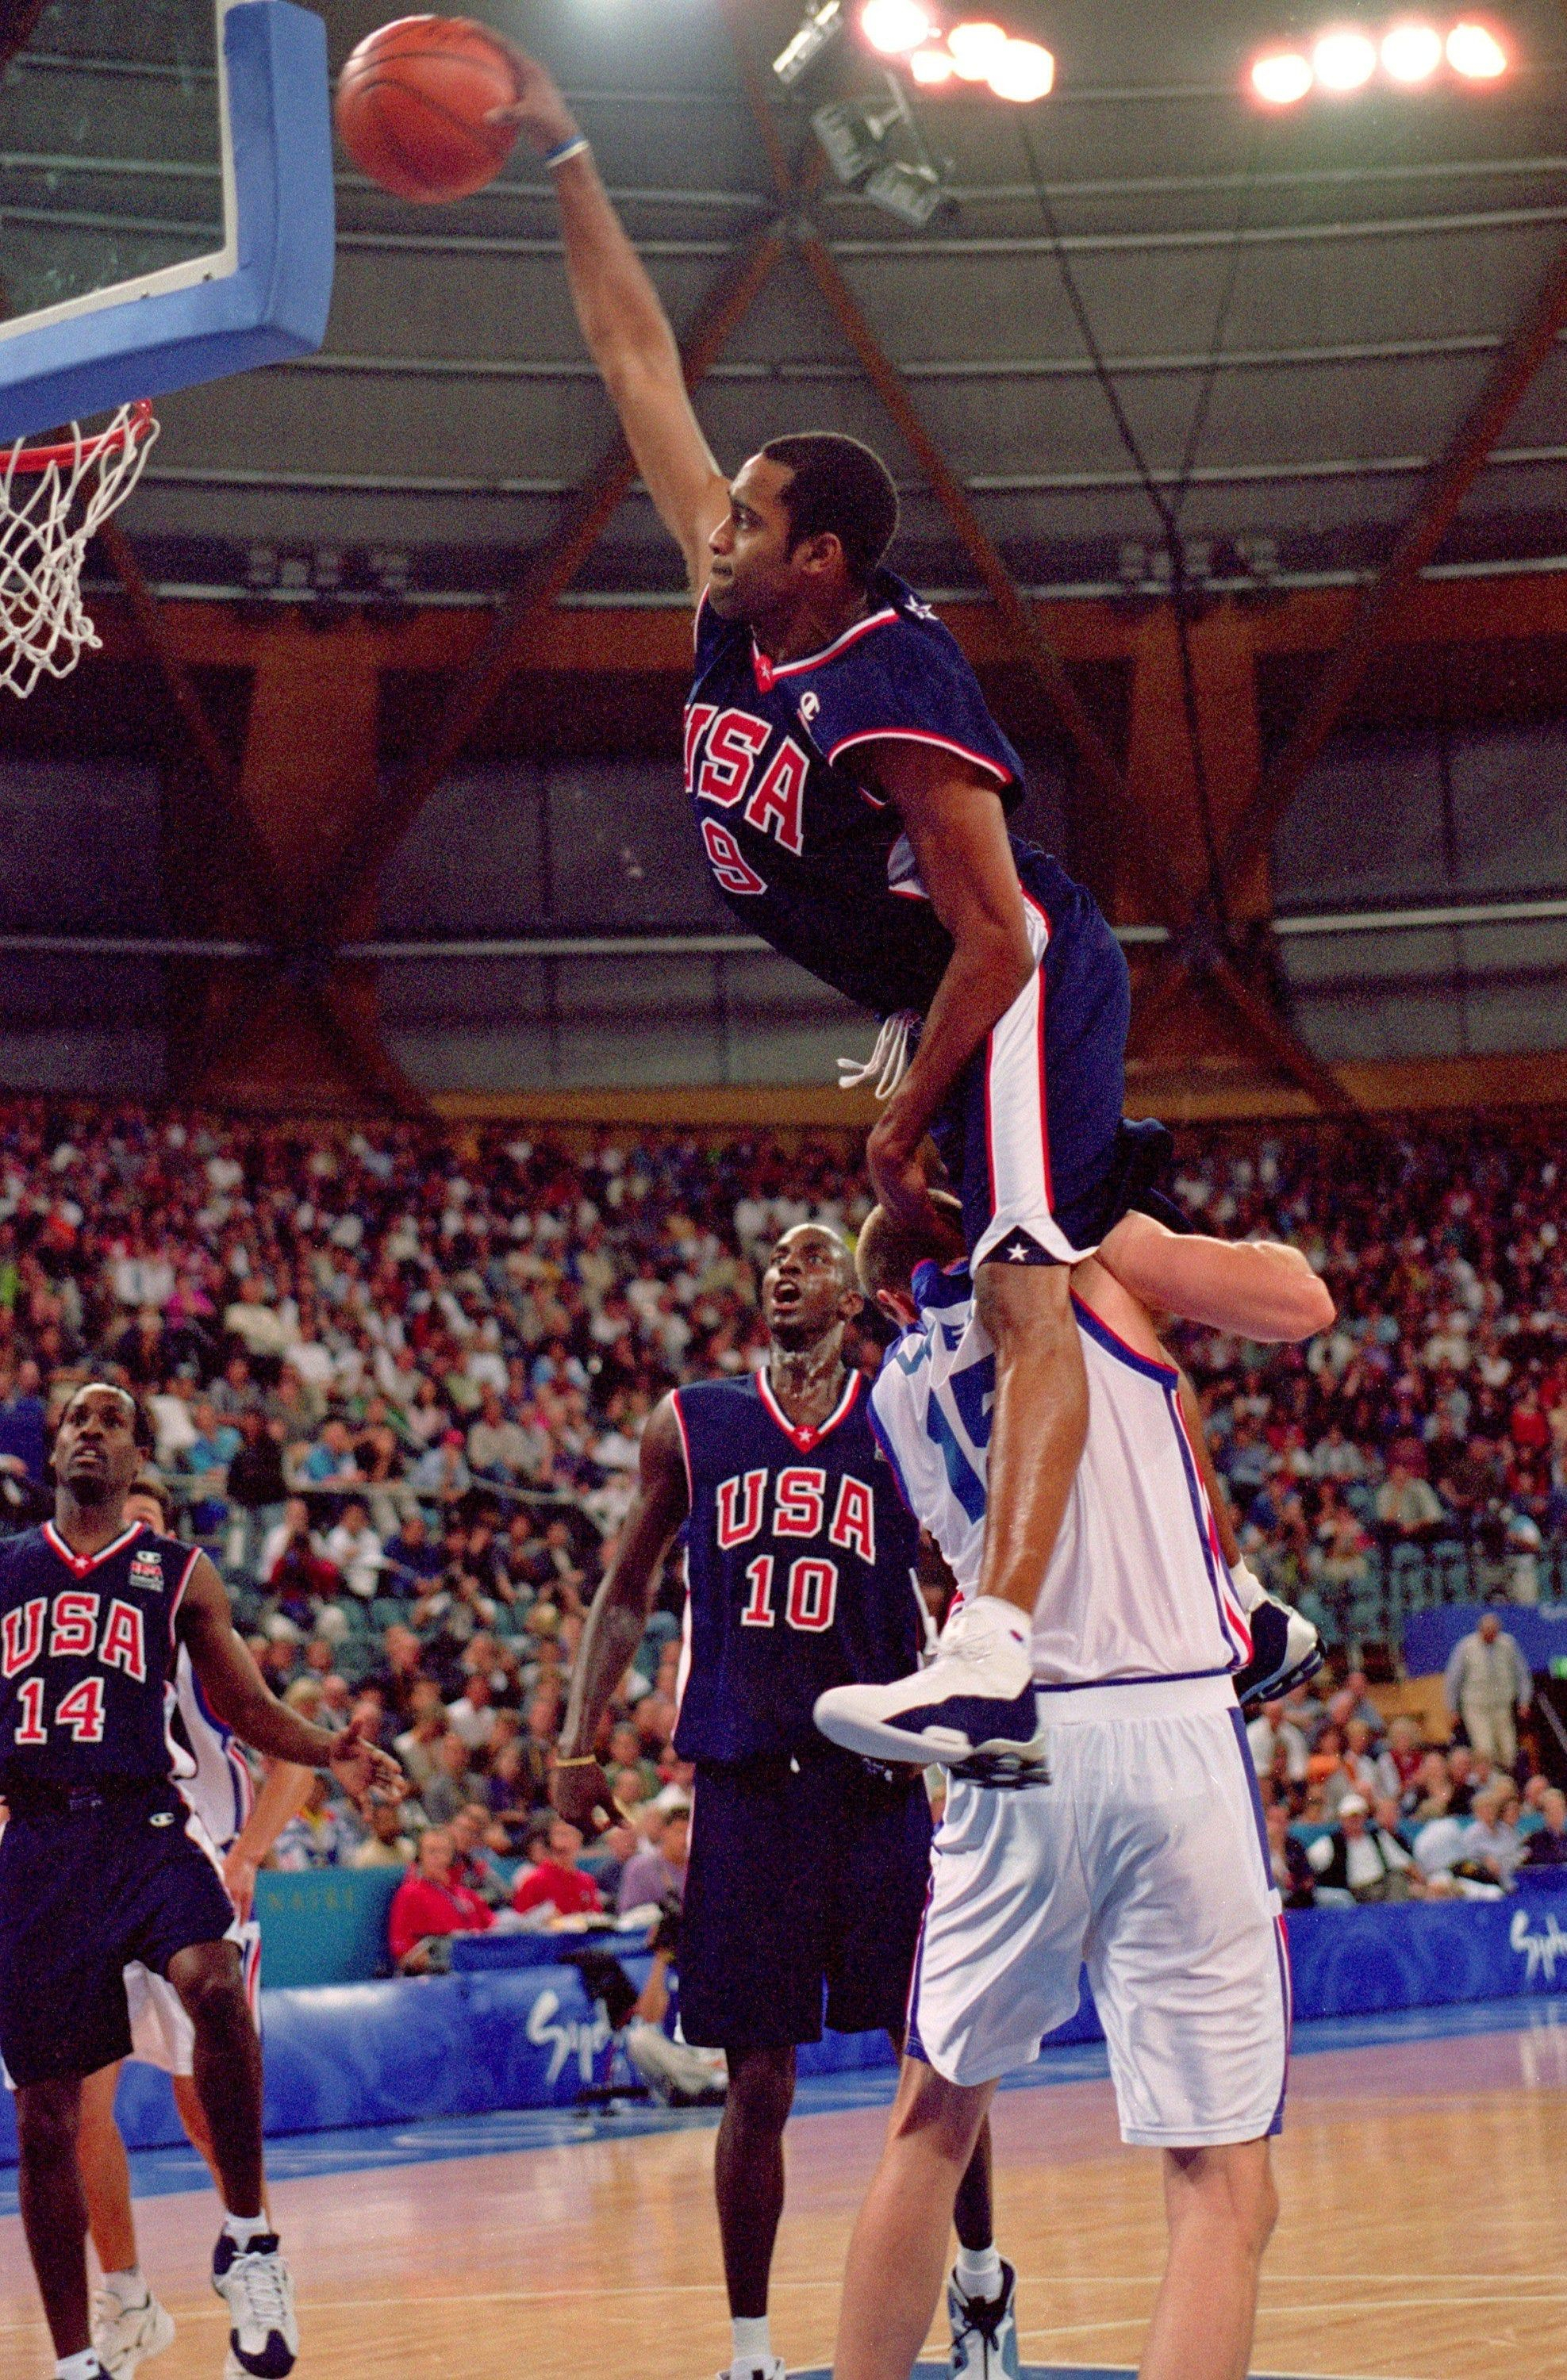 1975x3000 Vince Carter Olympics Dunk Poster 12x18 Etsy | Basketball photography, Olympic basketball, Nba pictures